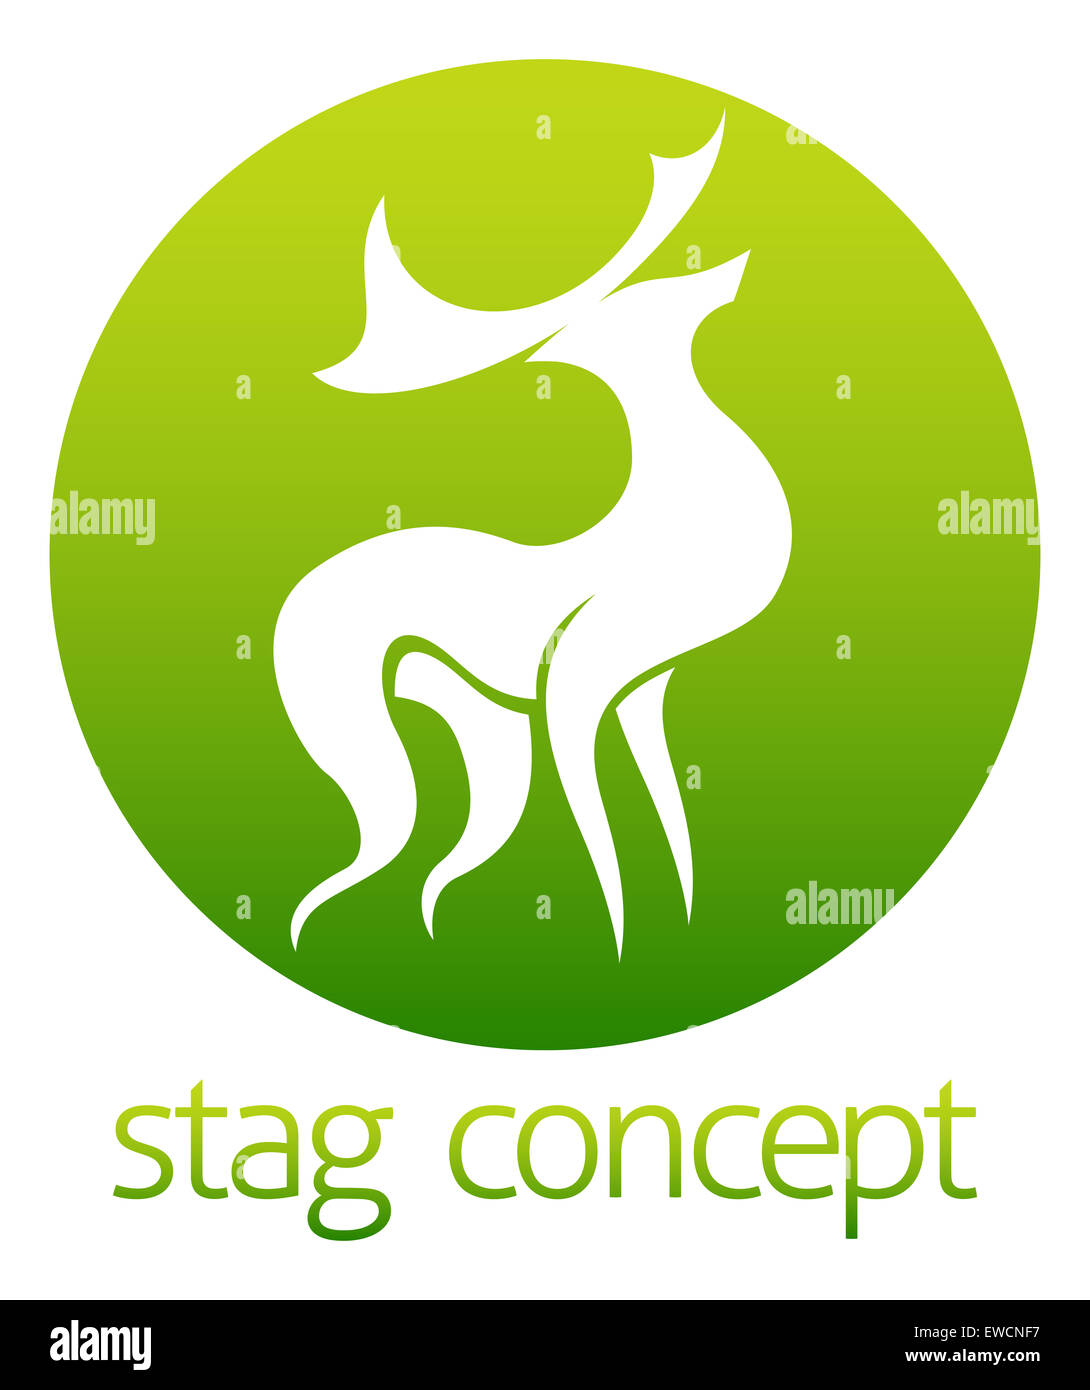 An abstract illustration of a deer stag circle concept design Stock Photo